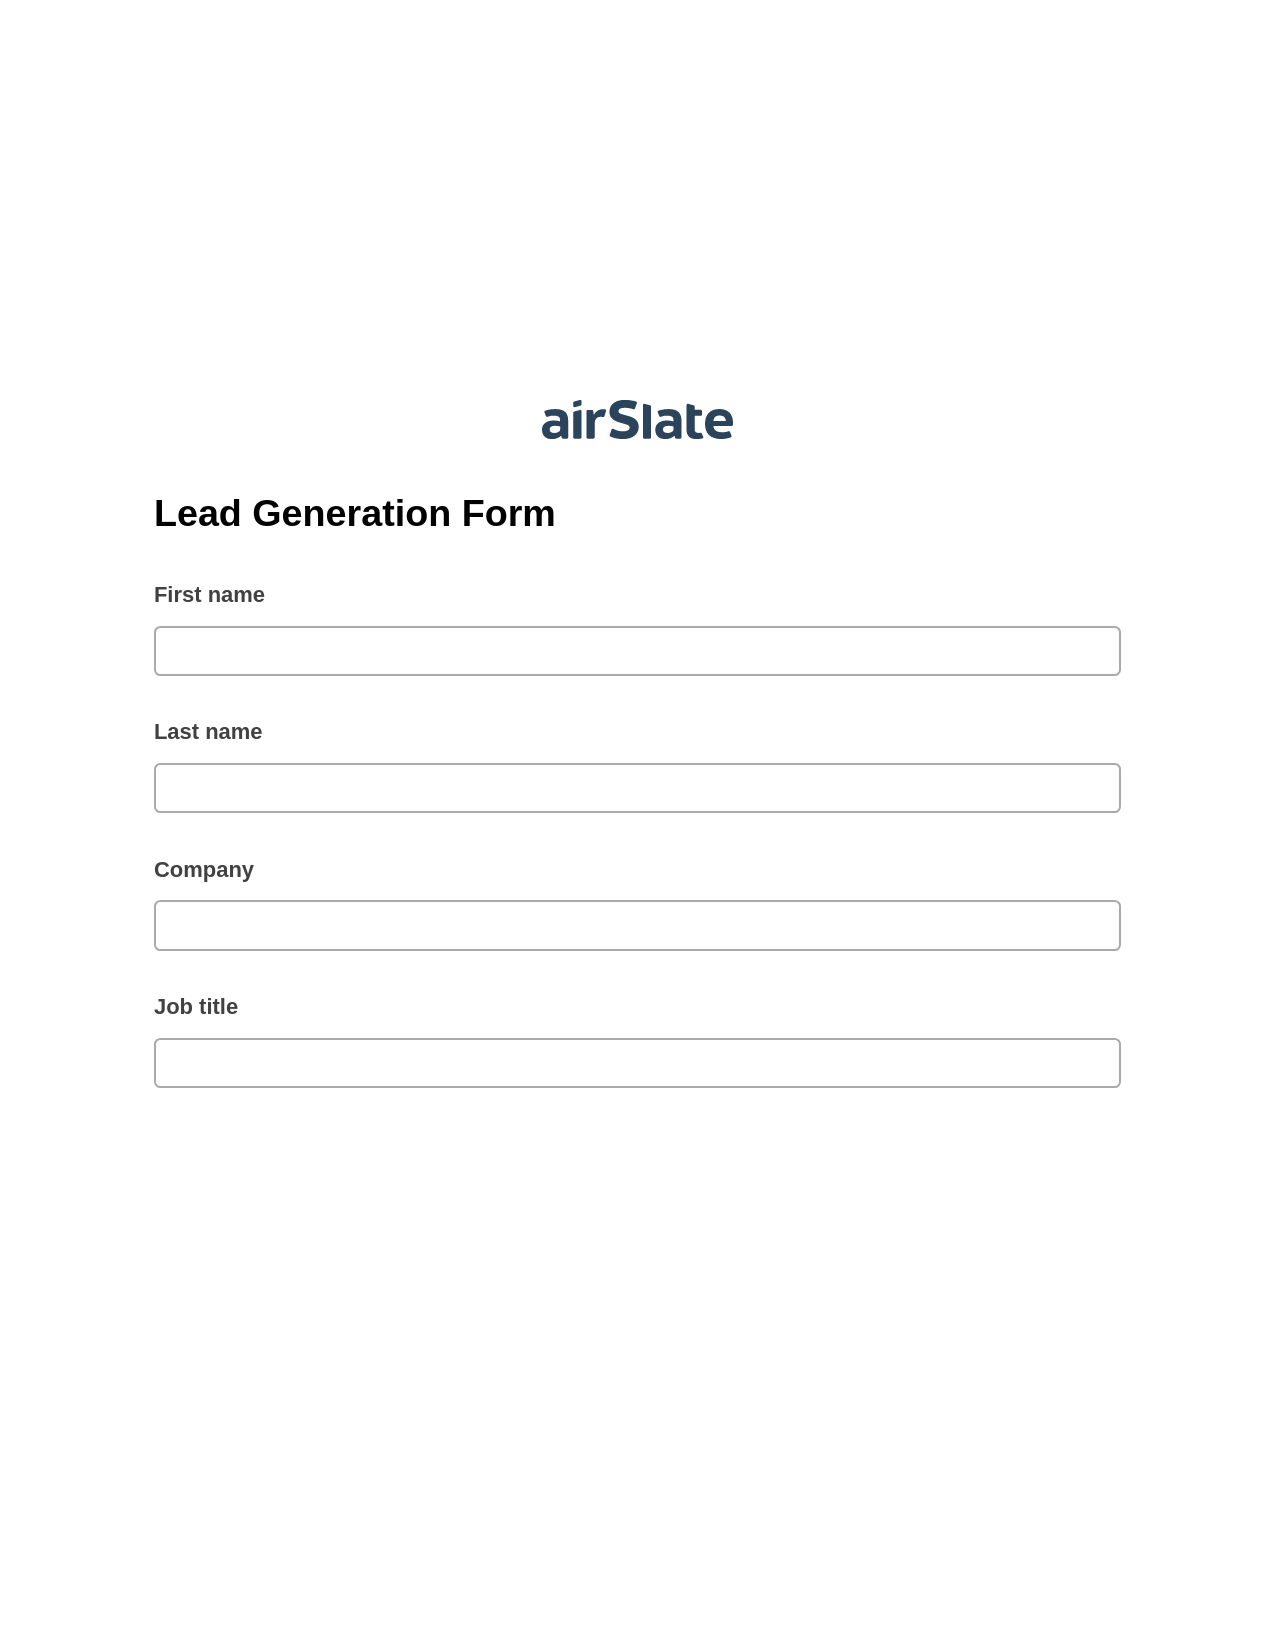 Lead Generation Form Pre-fill from another Slate Bot, Add Tags to Slate Bot, Archive to Box Bot